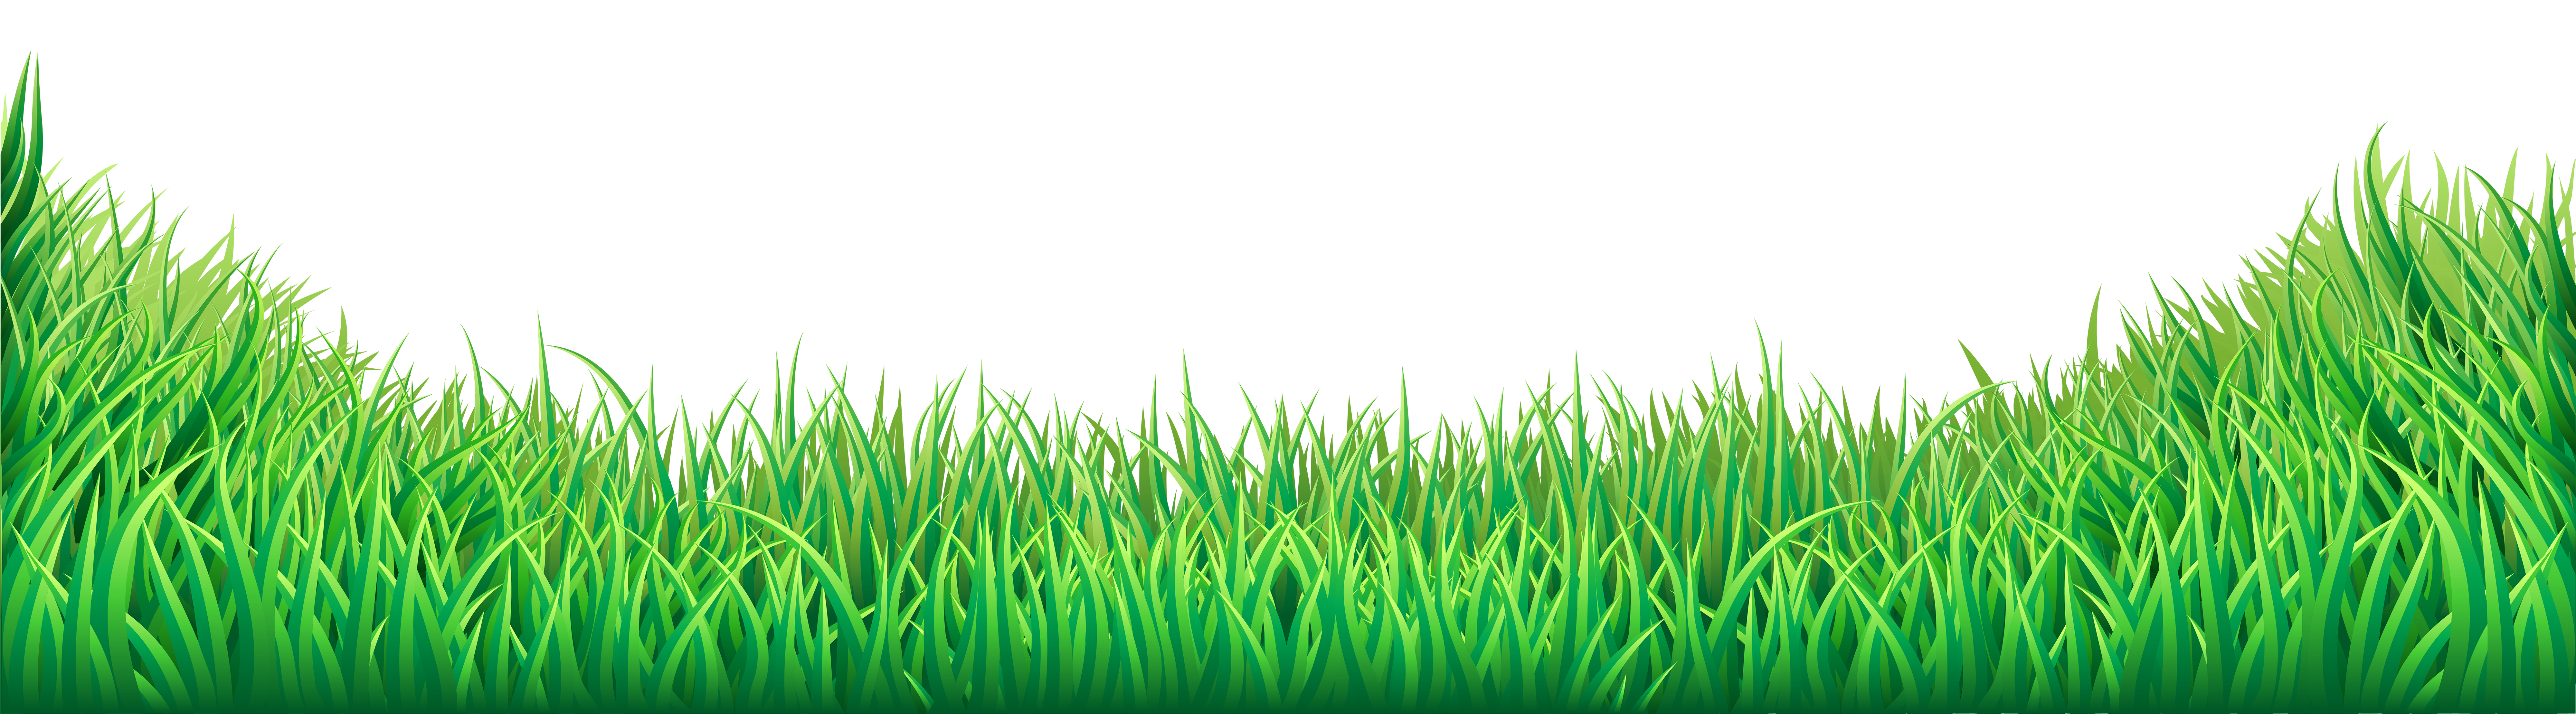 Grass PNG Transparent Clip Art Image | Gallery Yopriceville - High